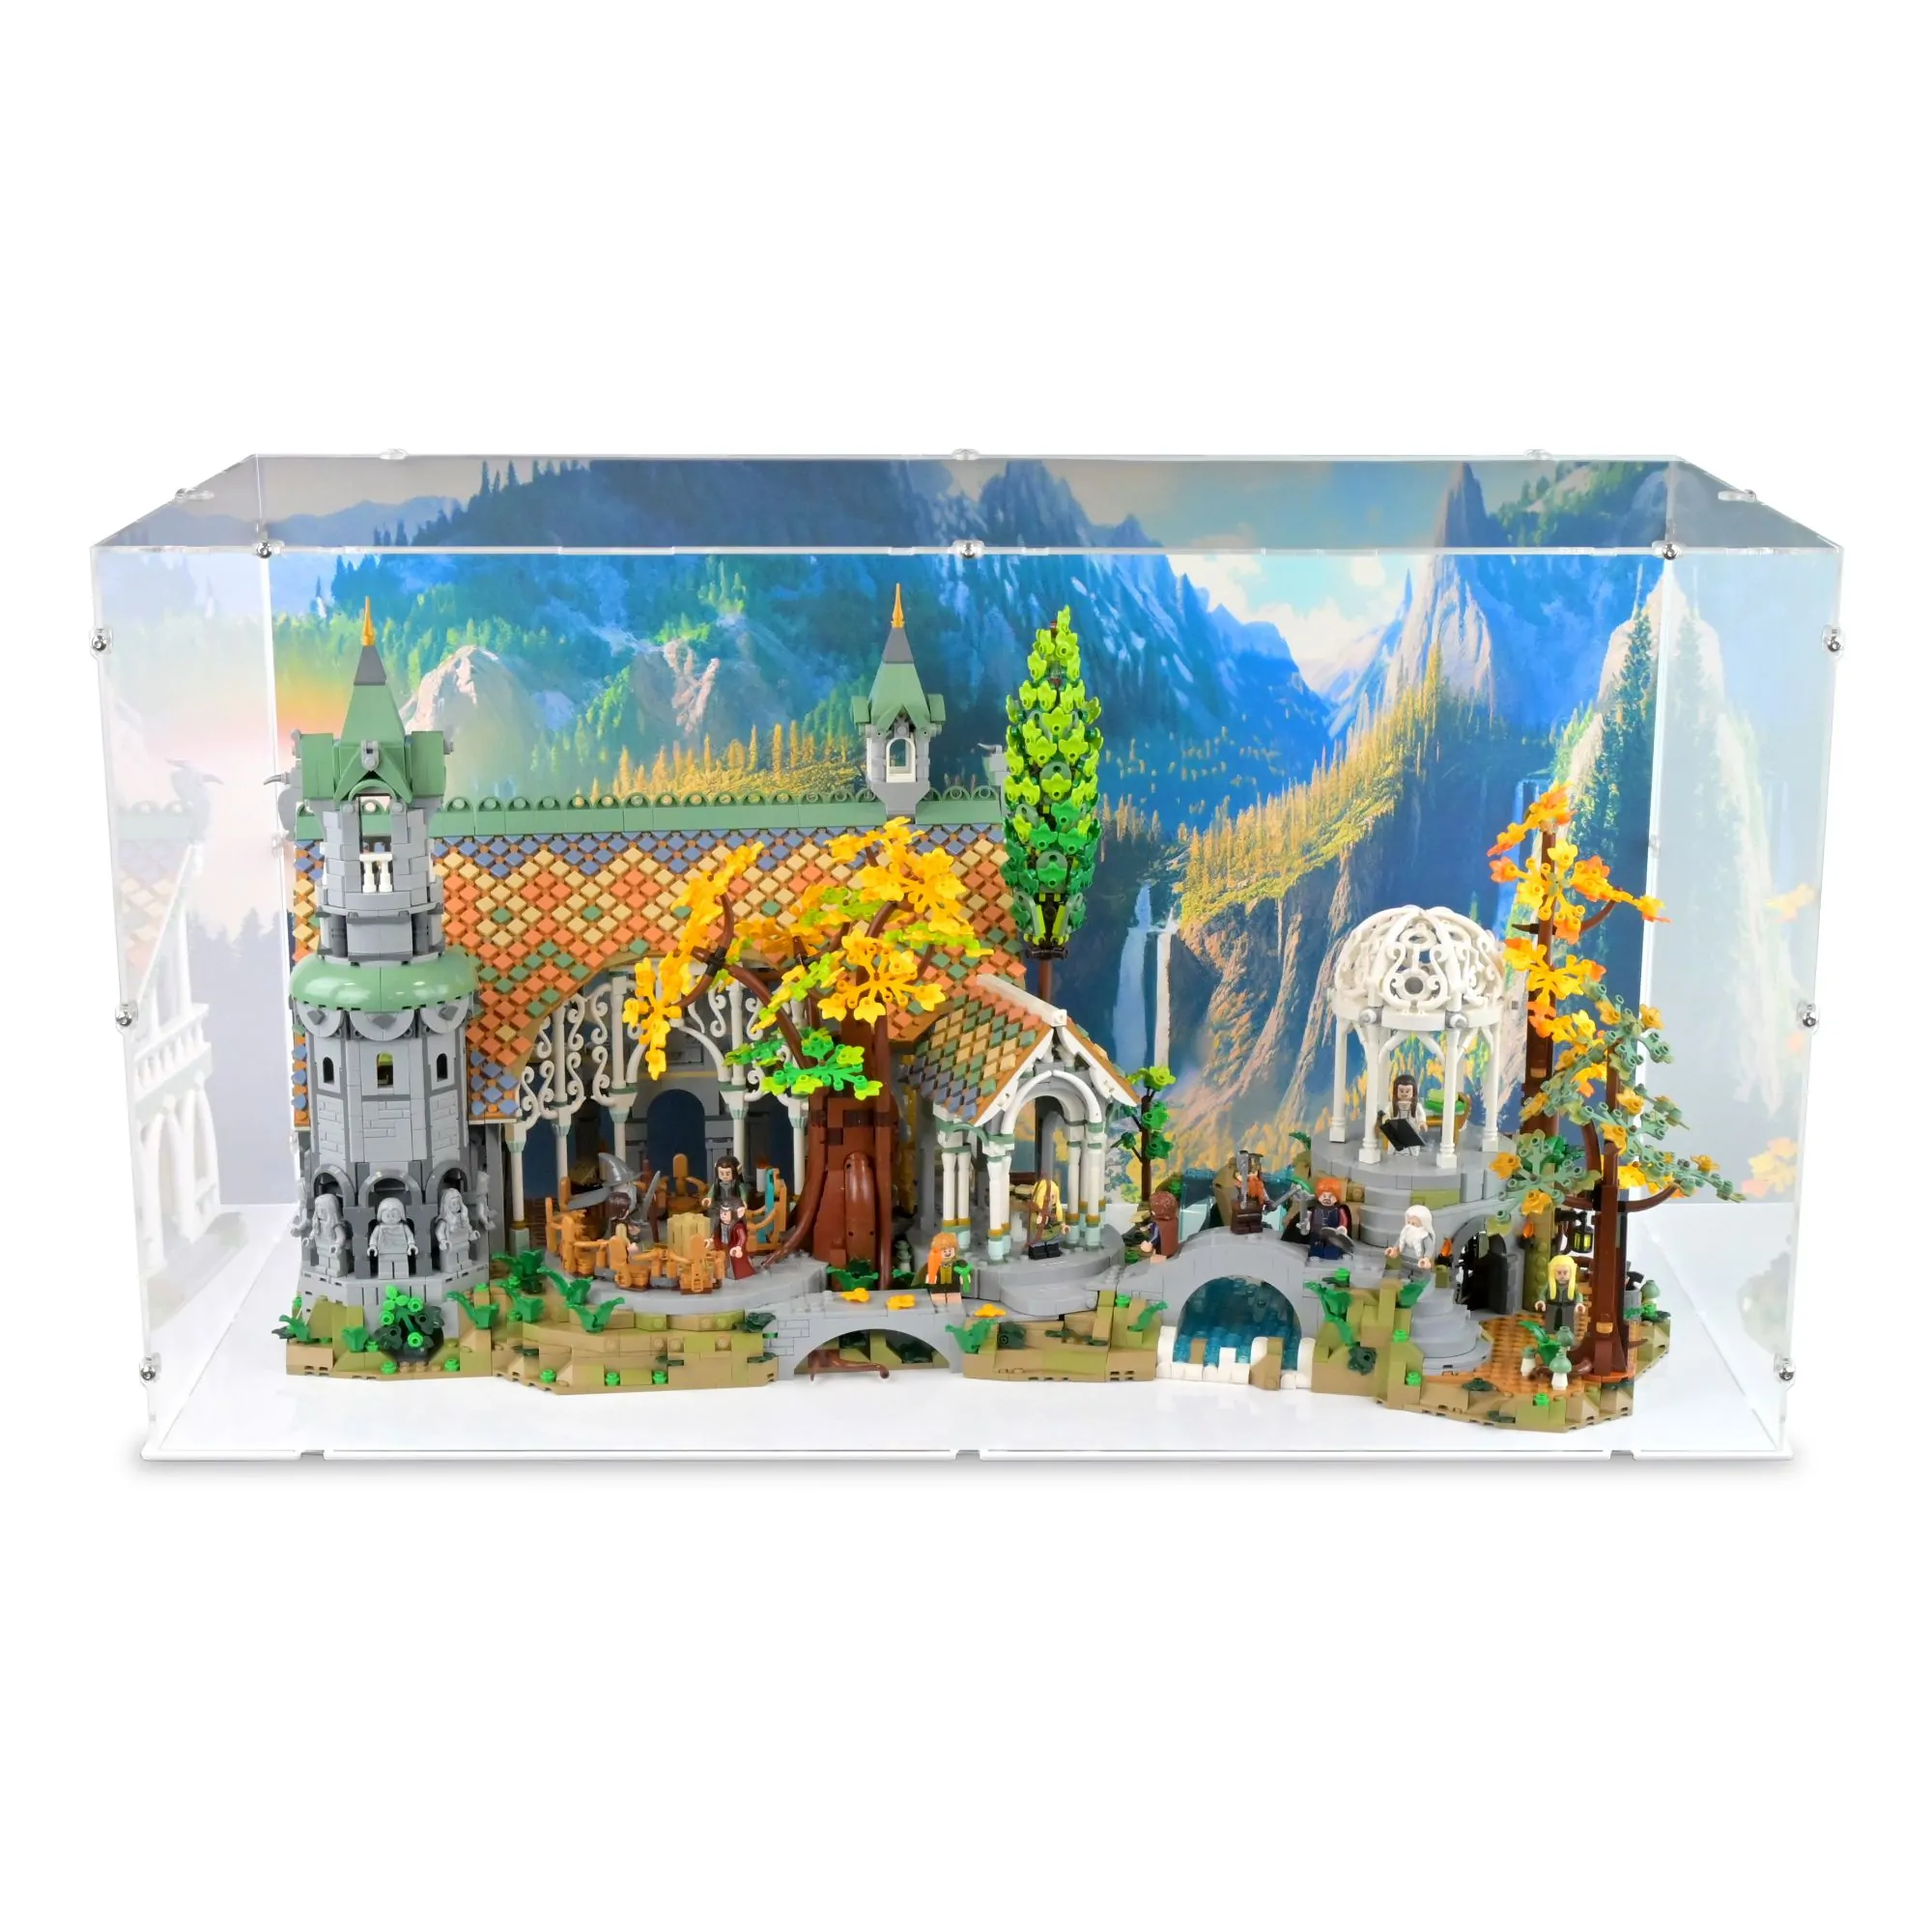 LEGO 10316 The Lord of the Rings: Rivendell comes to life in animated short